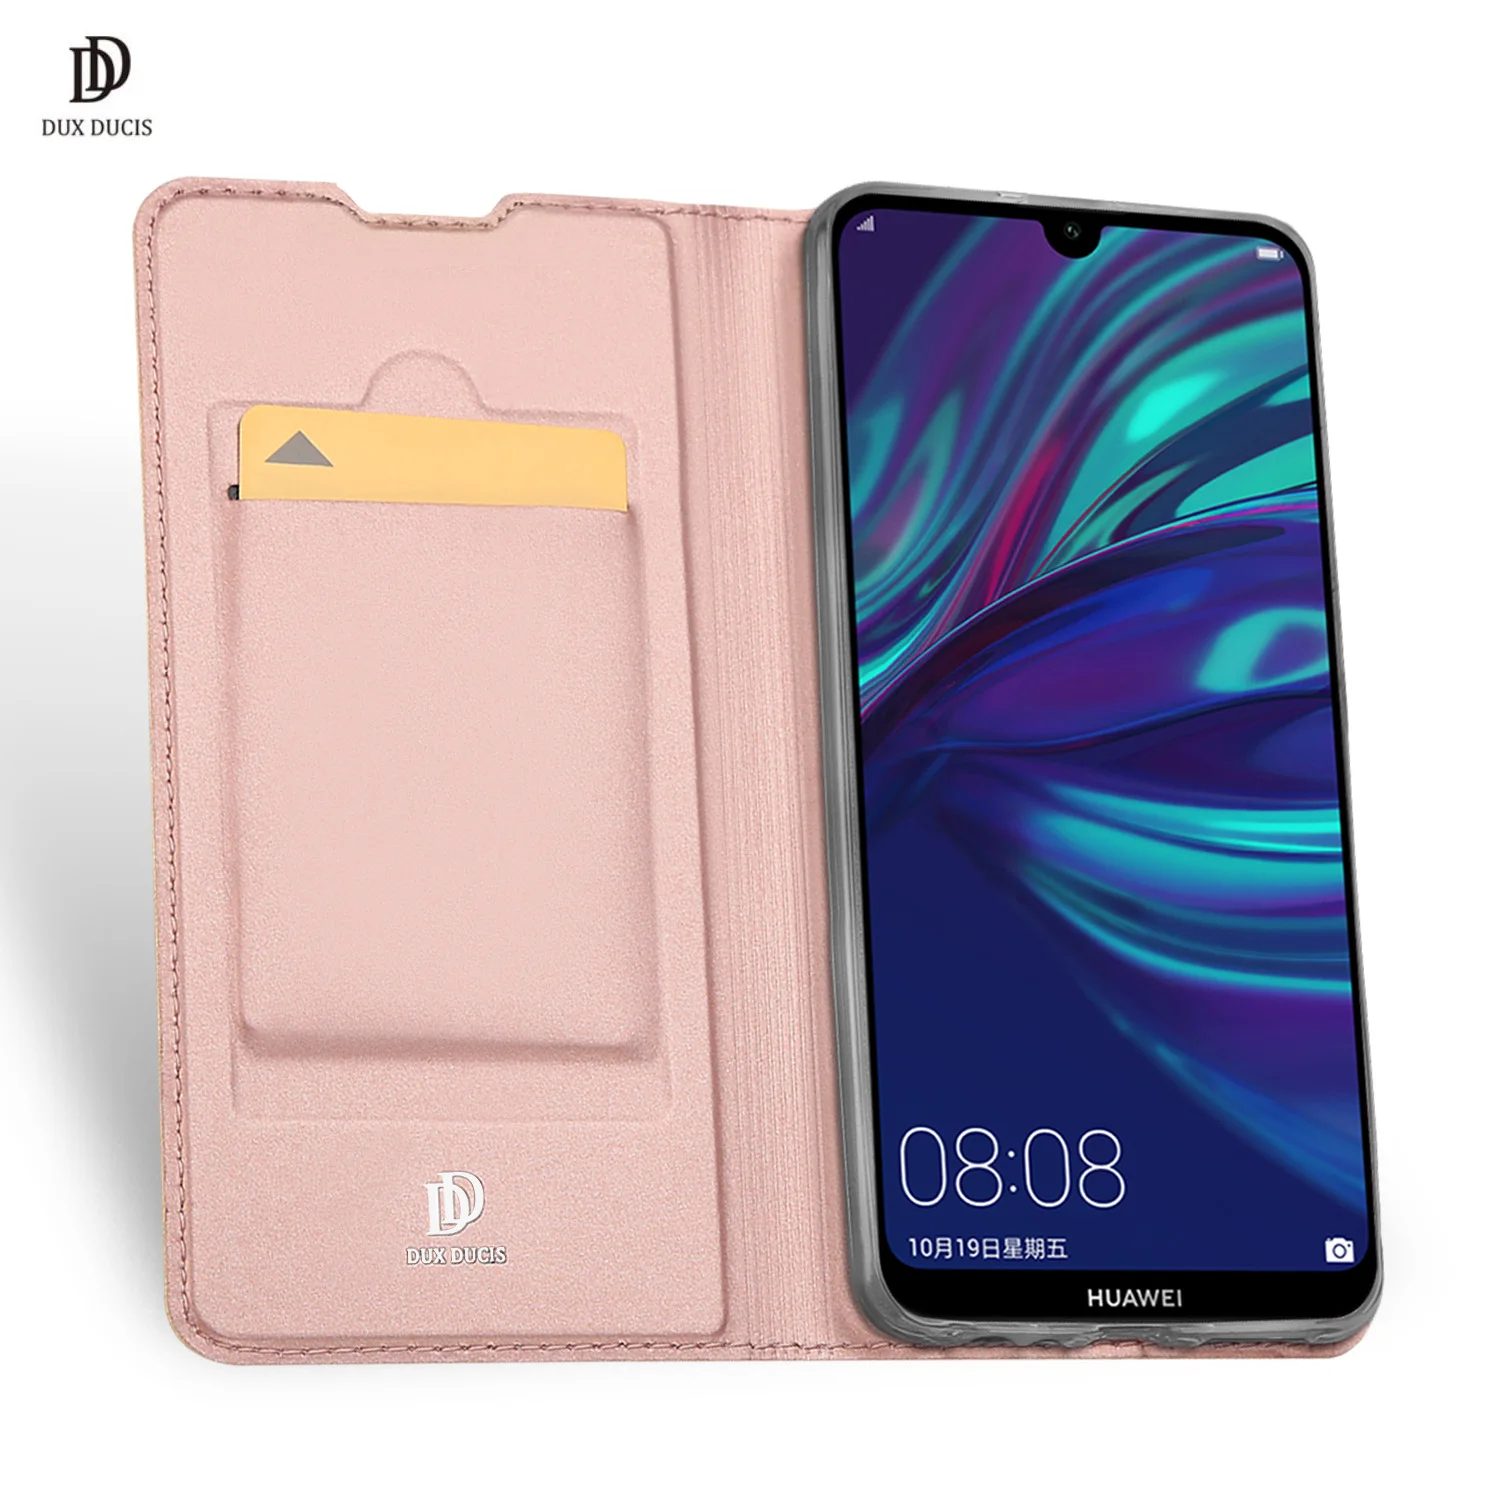 

For Huawei P Smart 2019 DUX DUCIS Skin Pro Series Leather Wallet Flip Case Full Protection Steady Stand Magnetic Closure